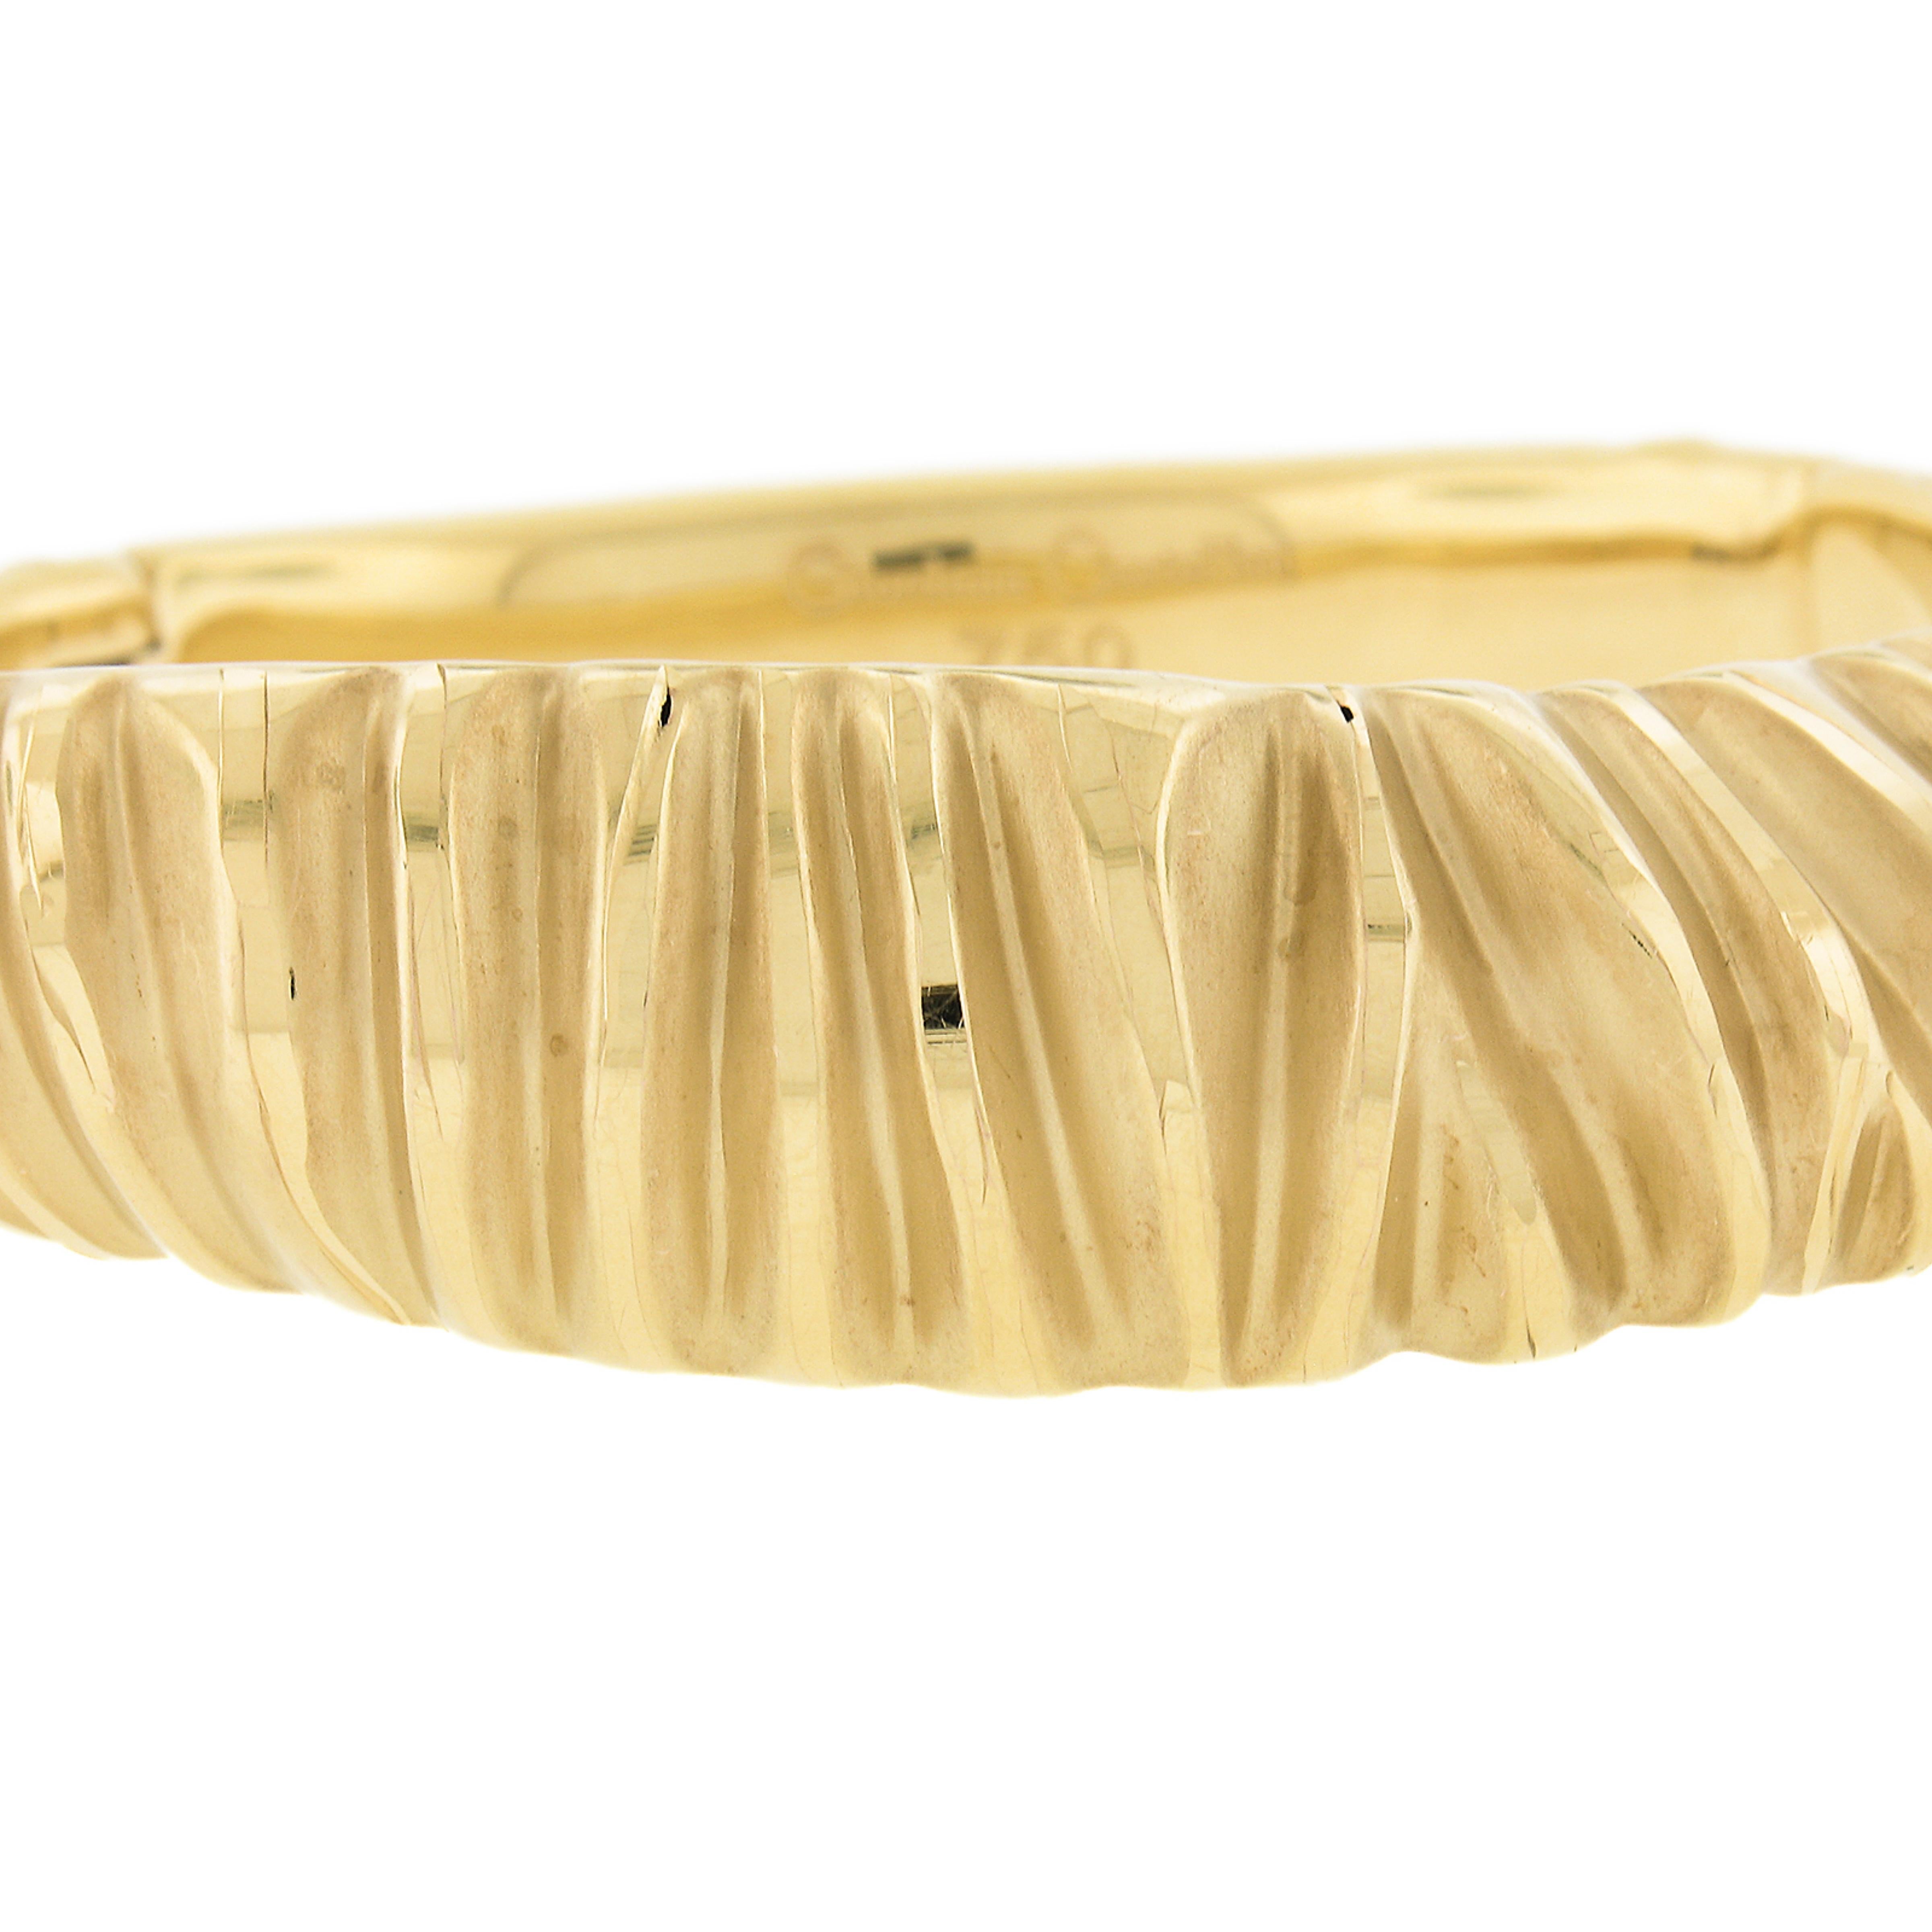 Material: Solid 18K Yellow Gold
Weight: 21.04 Grams
Type: Hinged Open Bangle Bracelet
Length: Will fit up to a 7 inch wrist (fitted on a wrist)
Clasp: Push Clasp w/ Safety Latch
Width: 18.2mm (0.71